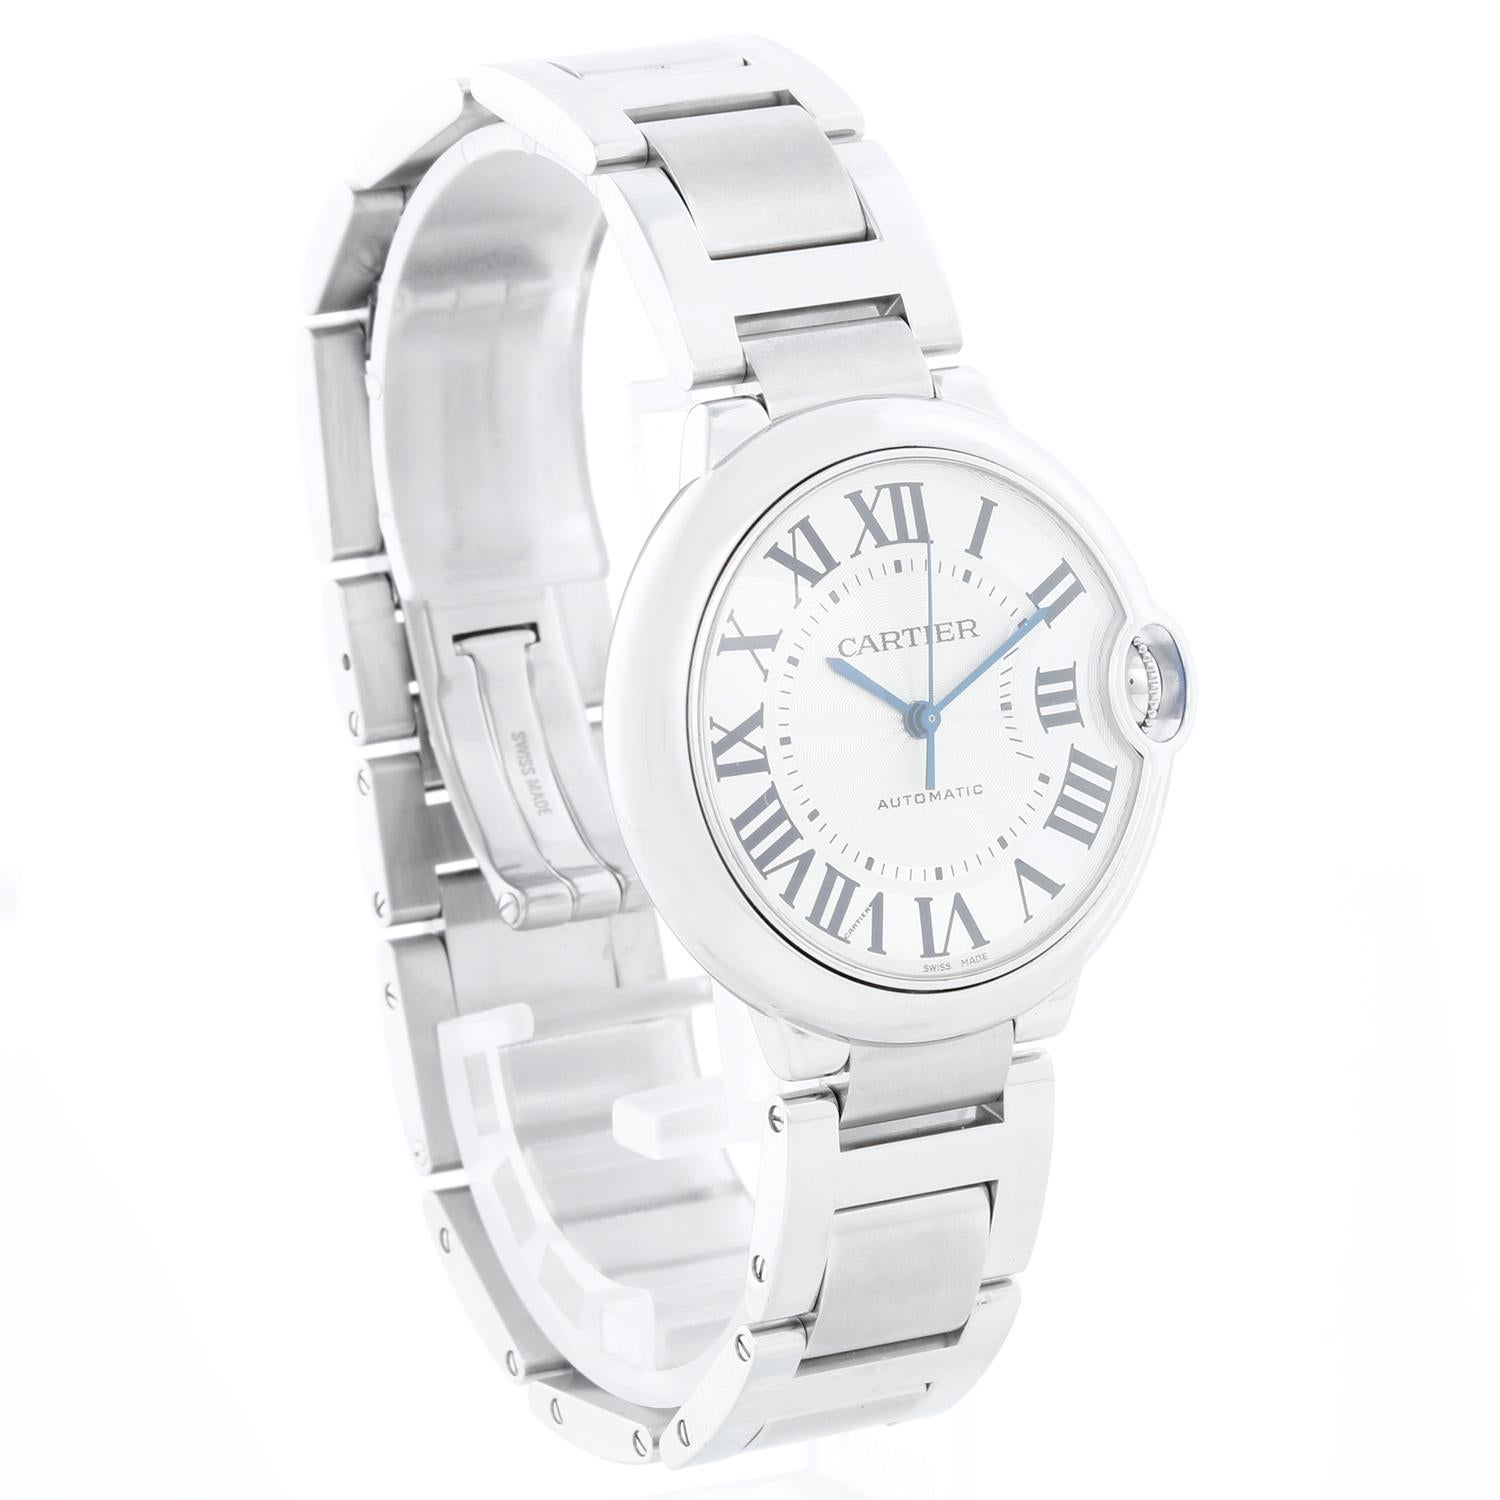 Cartier Ballon Bleu Midsize Stainless Steel Watch W6920046 3284 In Excellent Condition For Sale In Dallas, TX